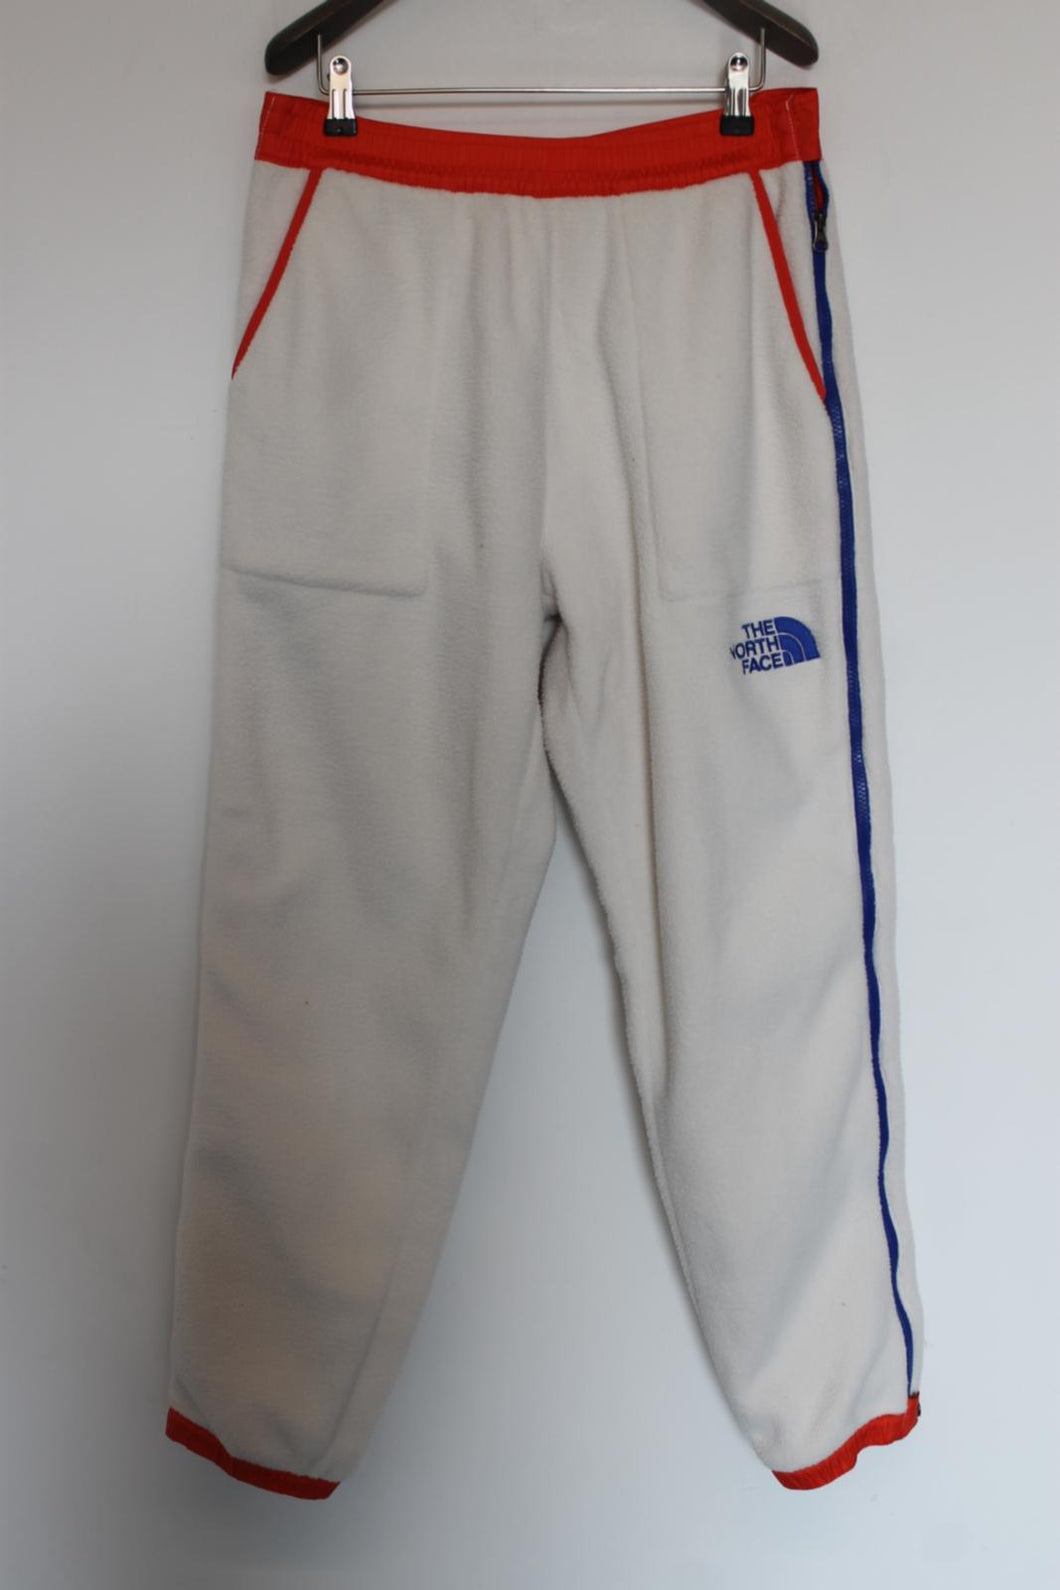 THE NORTH FACE Men's White Fleece Jogger Track Bottoms Trousers Size M BNWT